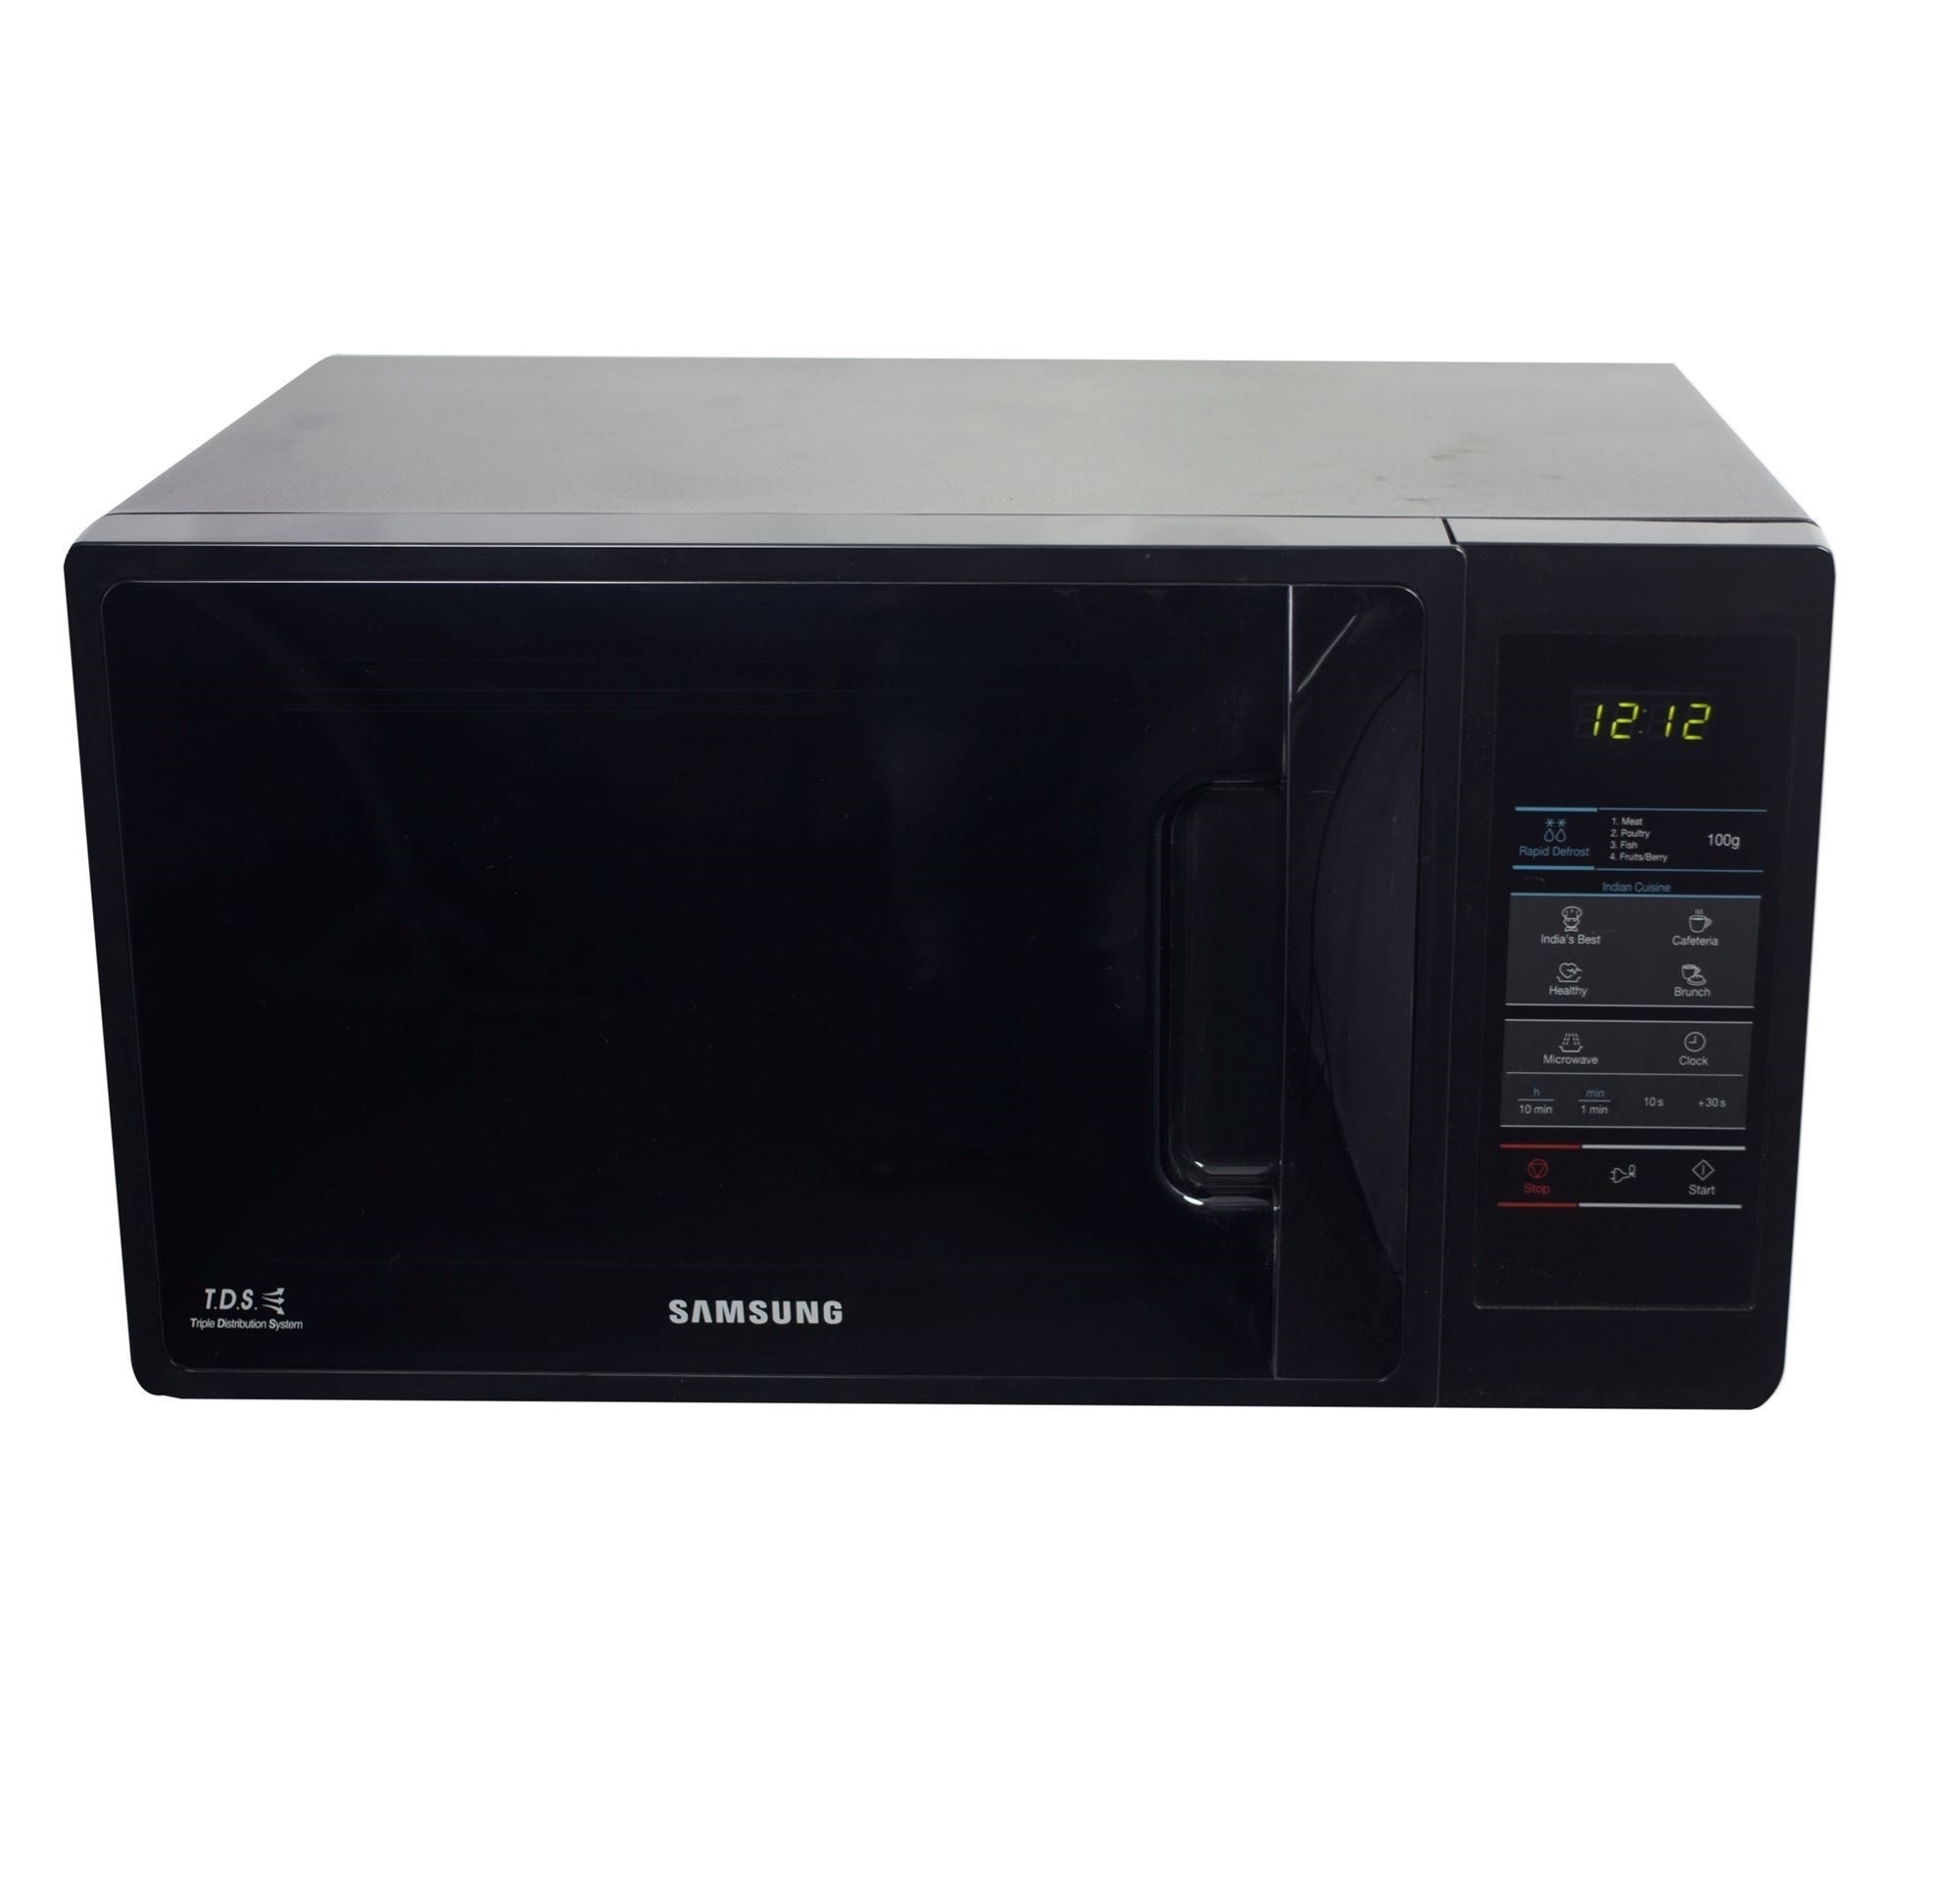 Samsung Solo Microwave Oven | MW73AD-B/D2 | 20 Litre - EasyShop